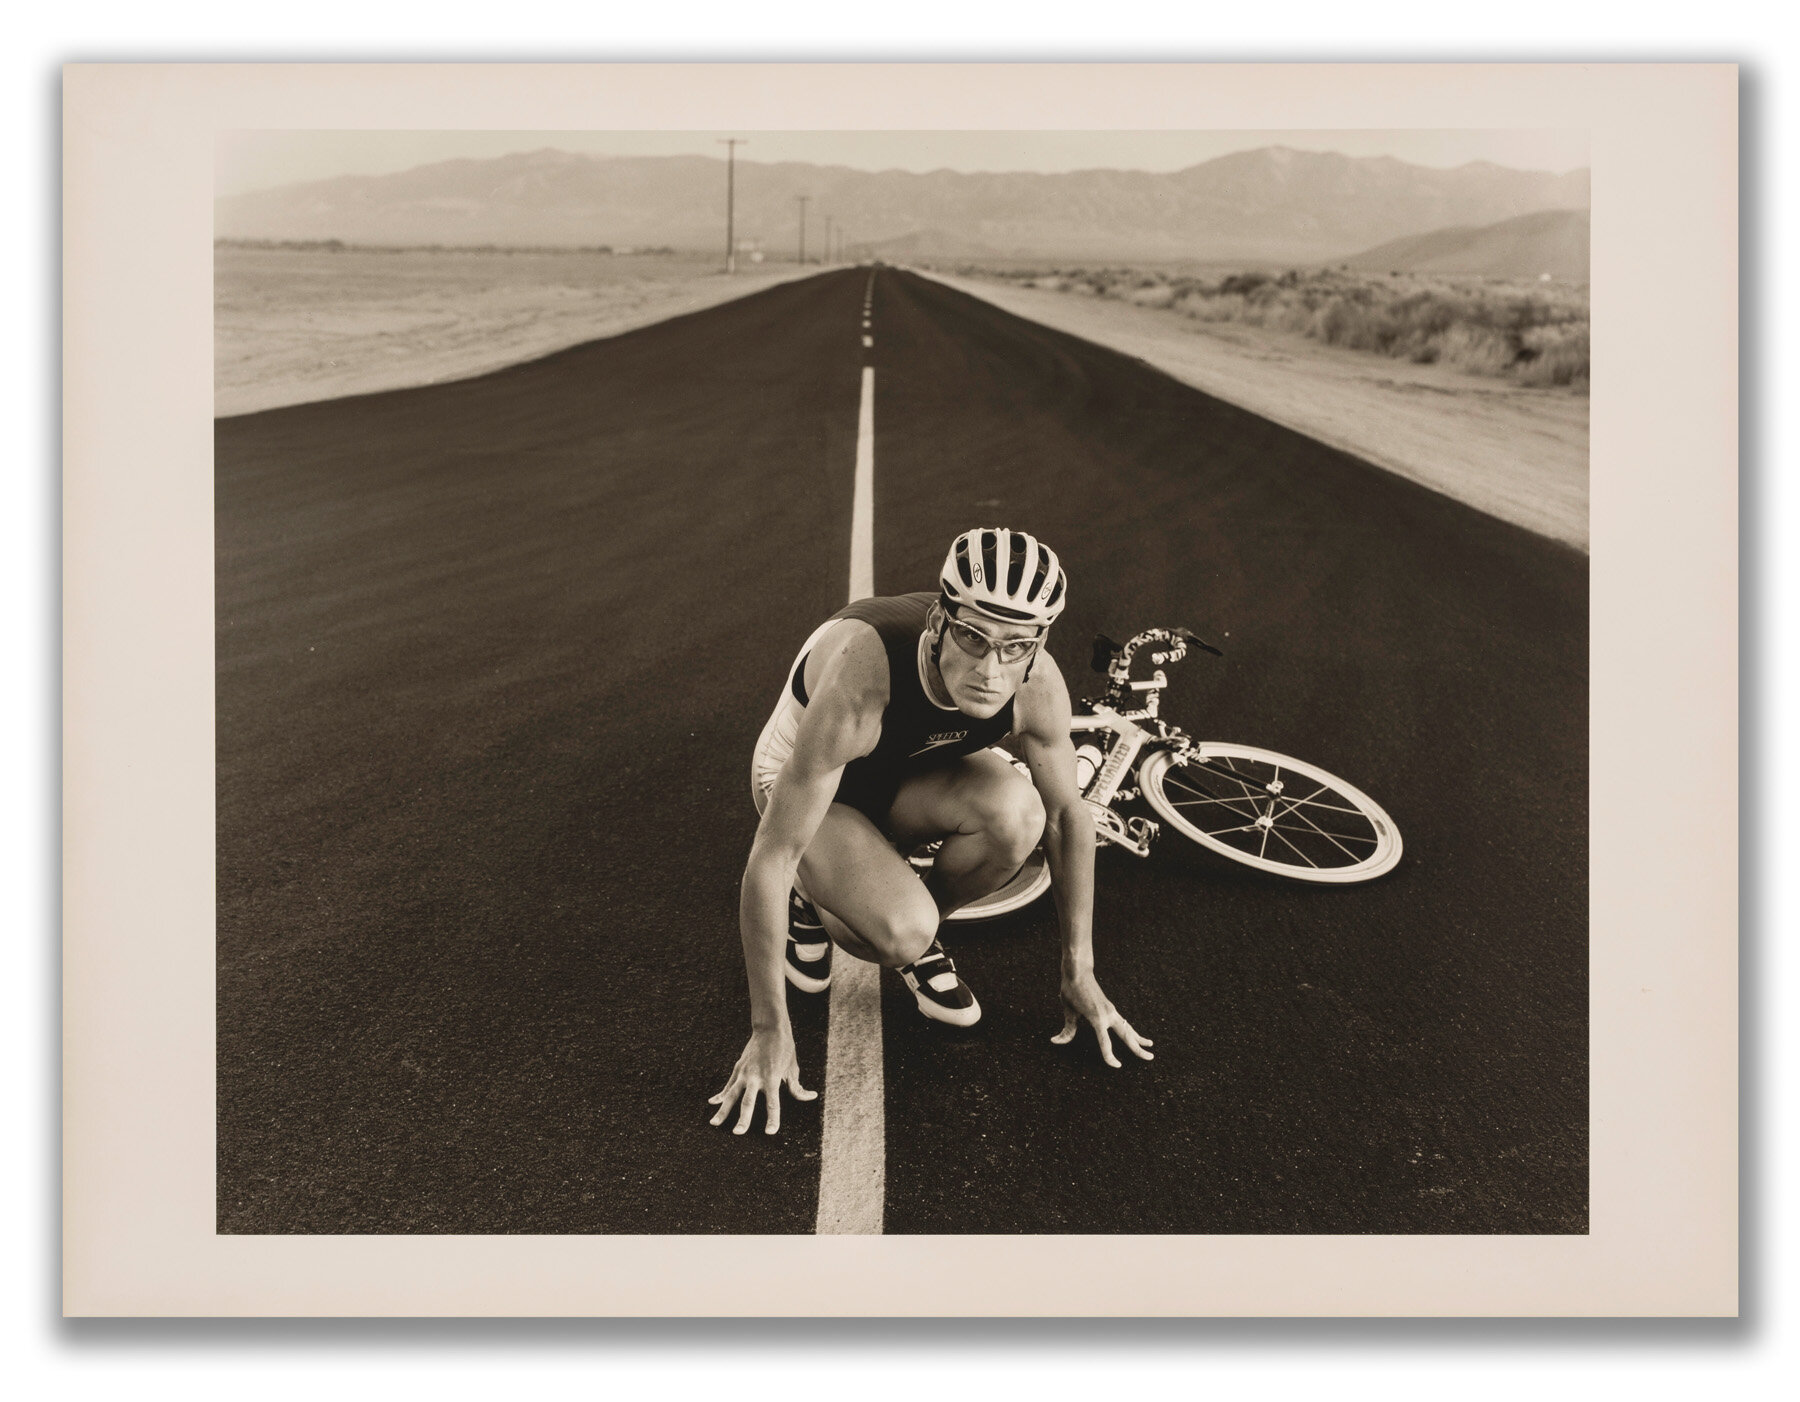 Jonathan Anderson &amp; Edwin Low (Anderson &amp; Low), The Contenders (Spencer Smith, Triathlete, England), Printed 2002.